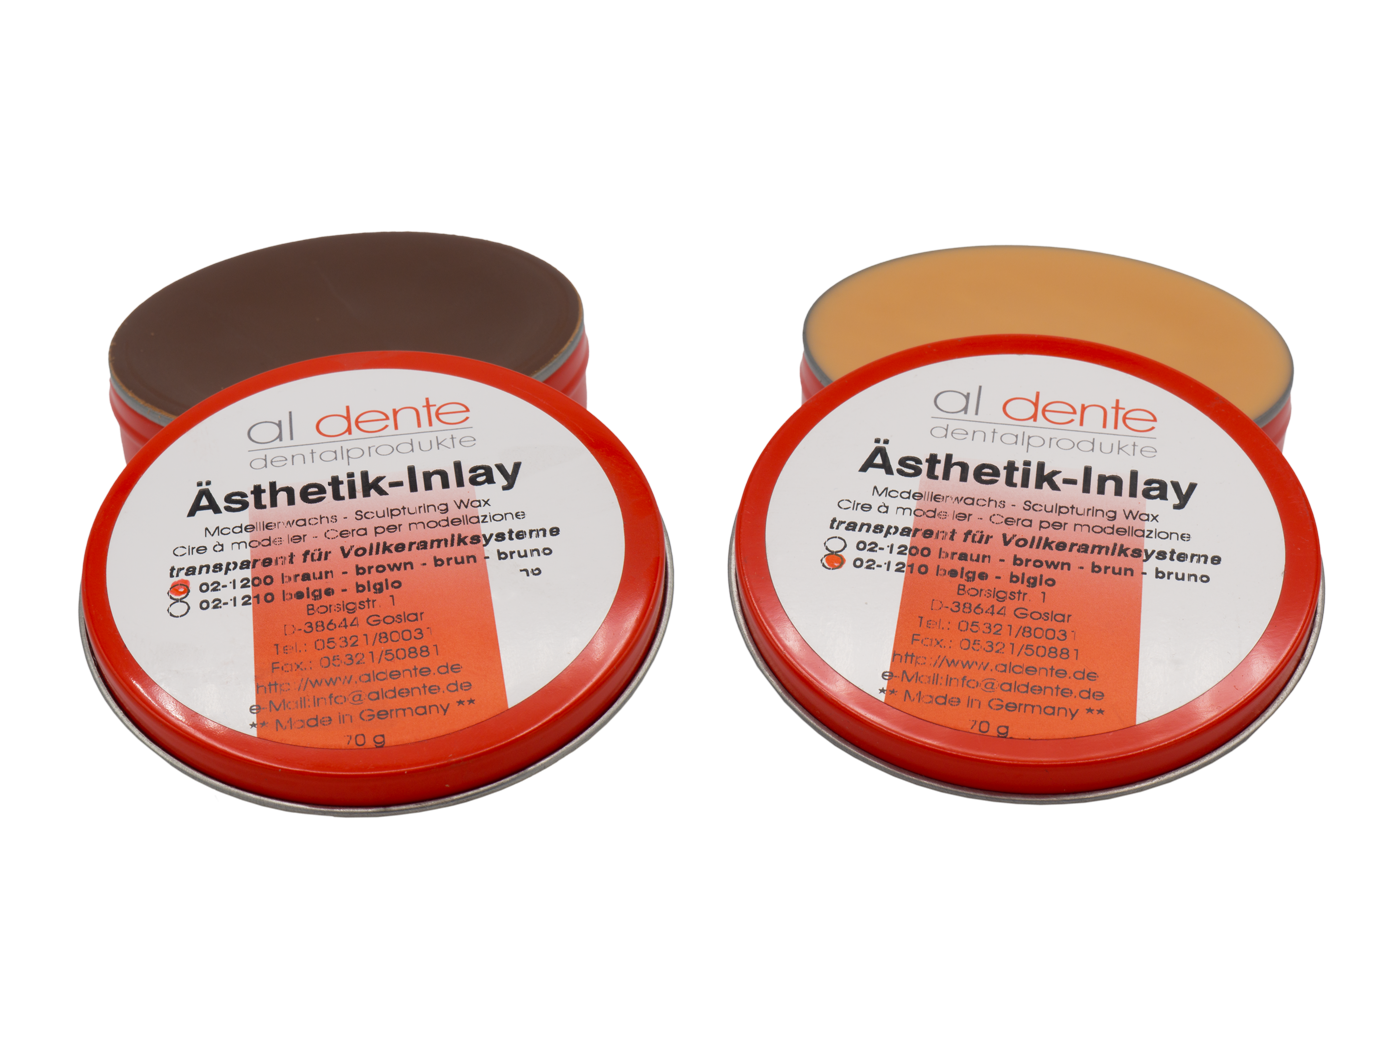 Aesthetic-Inlay Wax brown transparent, 70 g